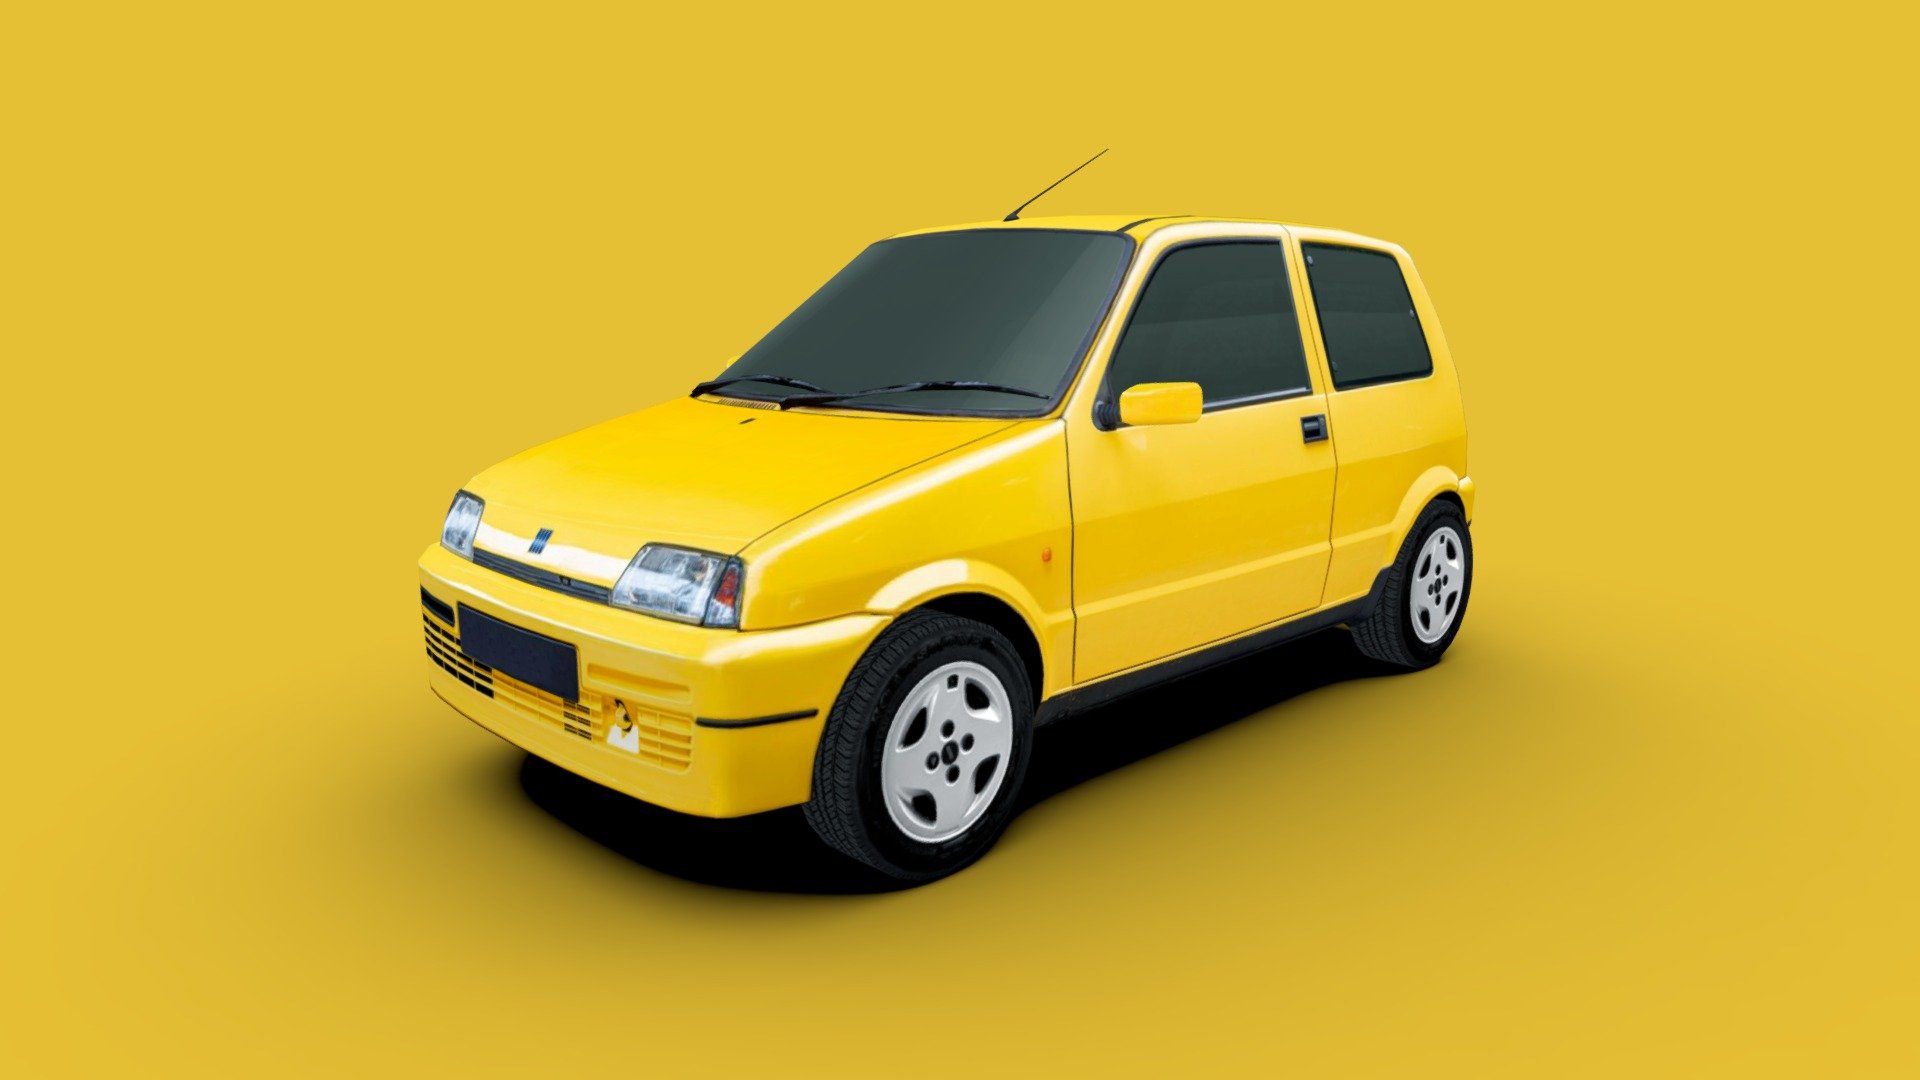 3d model of the 1995 Fiat Cinquecento Sporting, a 3-door hatchback city car

The model is very low-poly, full-scale, real photos texture (single 2048 x 2048 png).

Package includes 5 file formats and texture (3ds, fbx, dae, obj and skp)

Hope you enjoy it.

José Bronze - Fiat Cinquecento Sporting 1995 - Buy Royalty Free 3D model by Jose Bronze (@pinceladas3d) 3d model